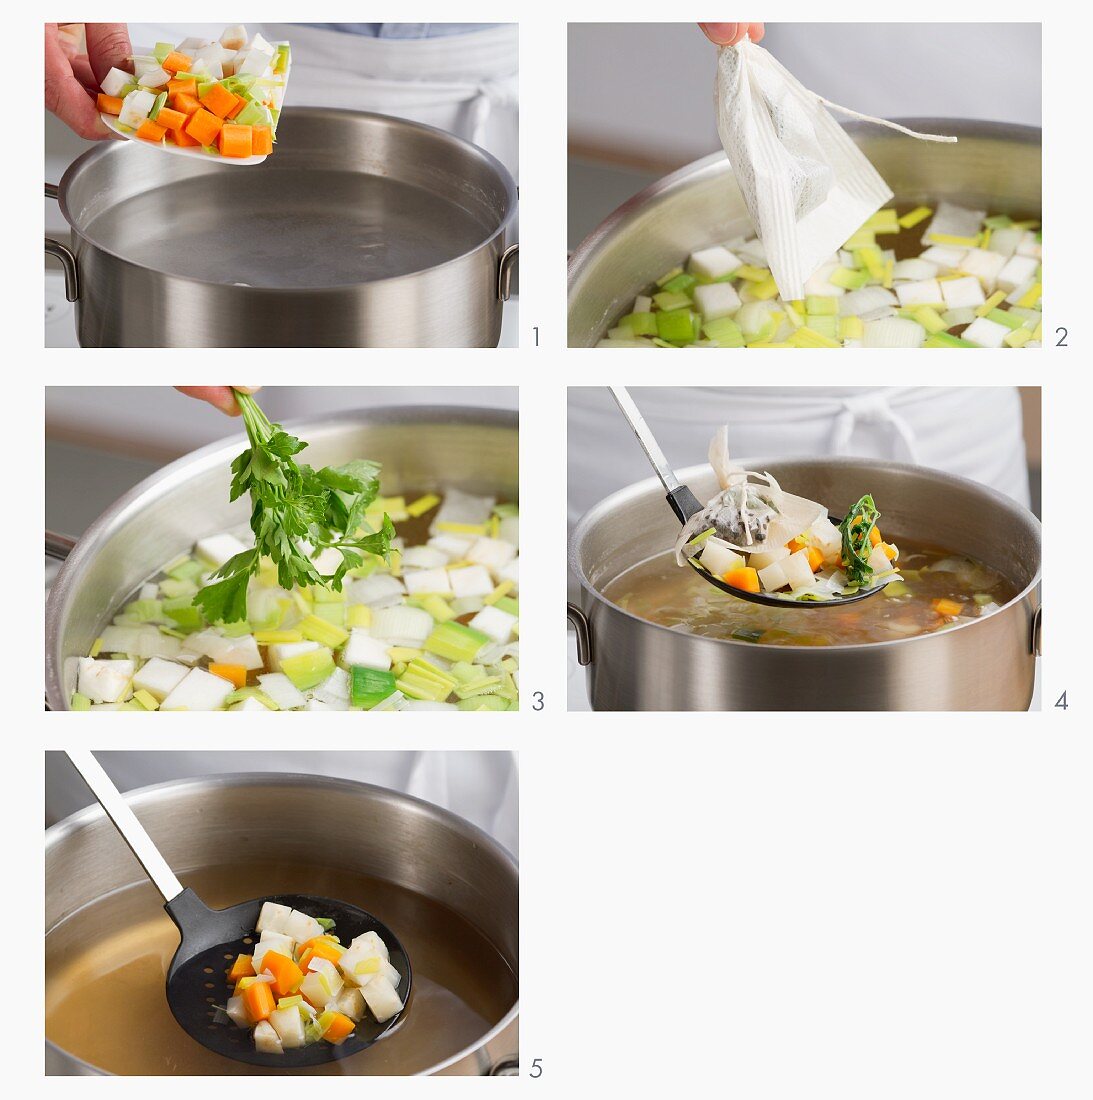 Vegetable stock being made